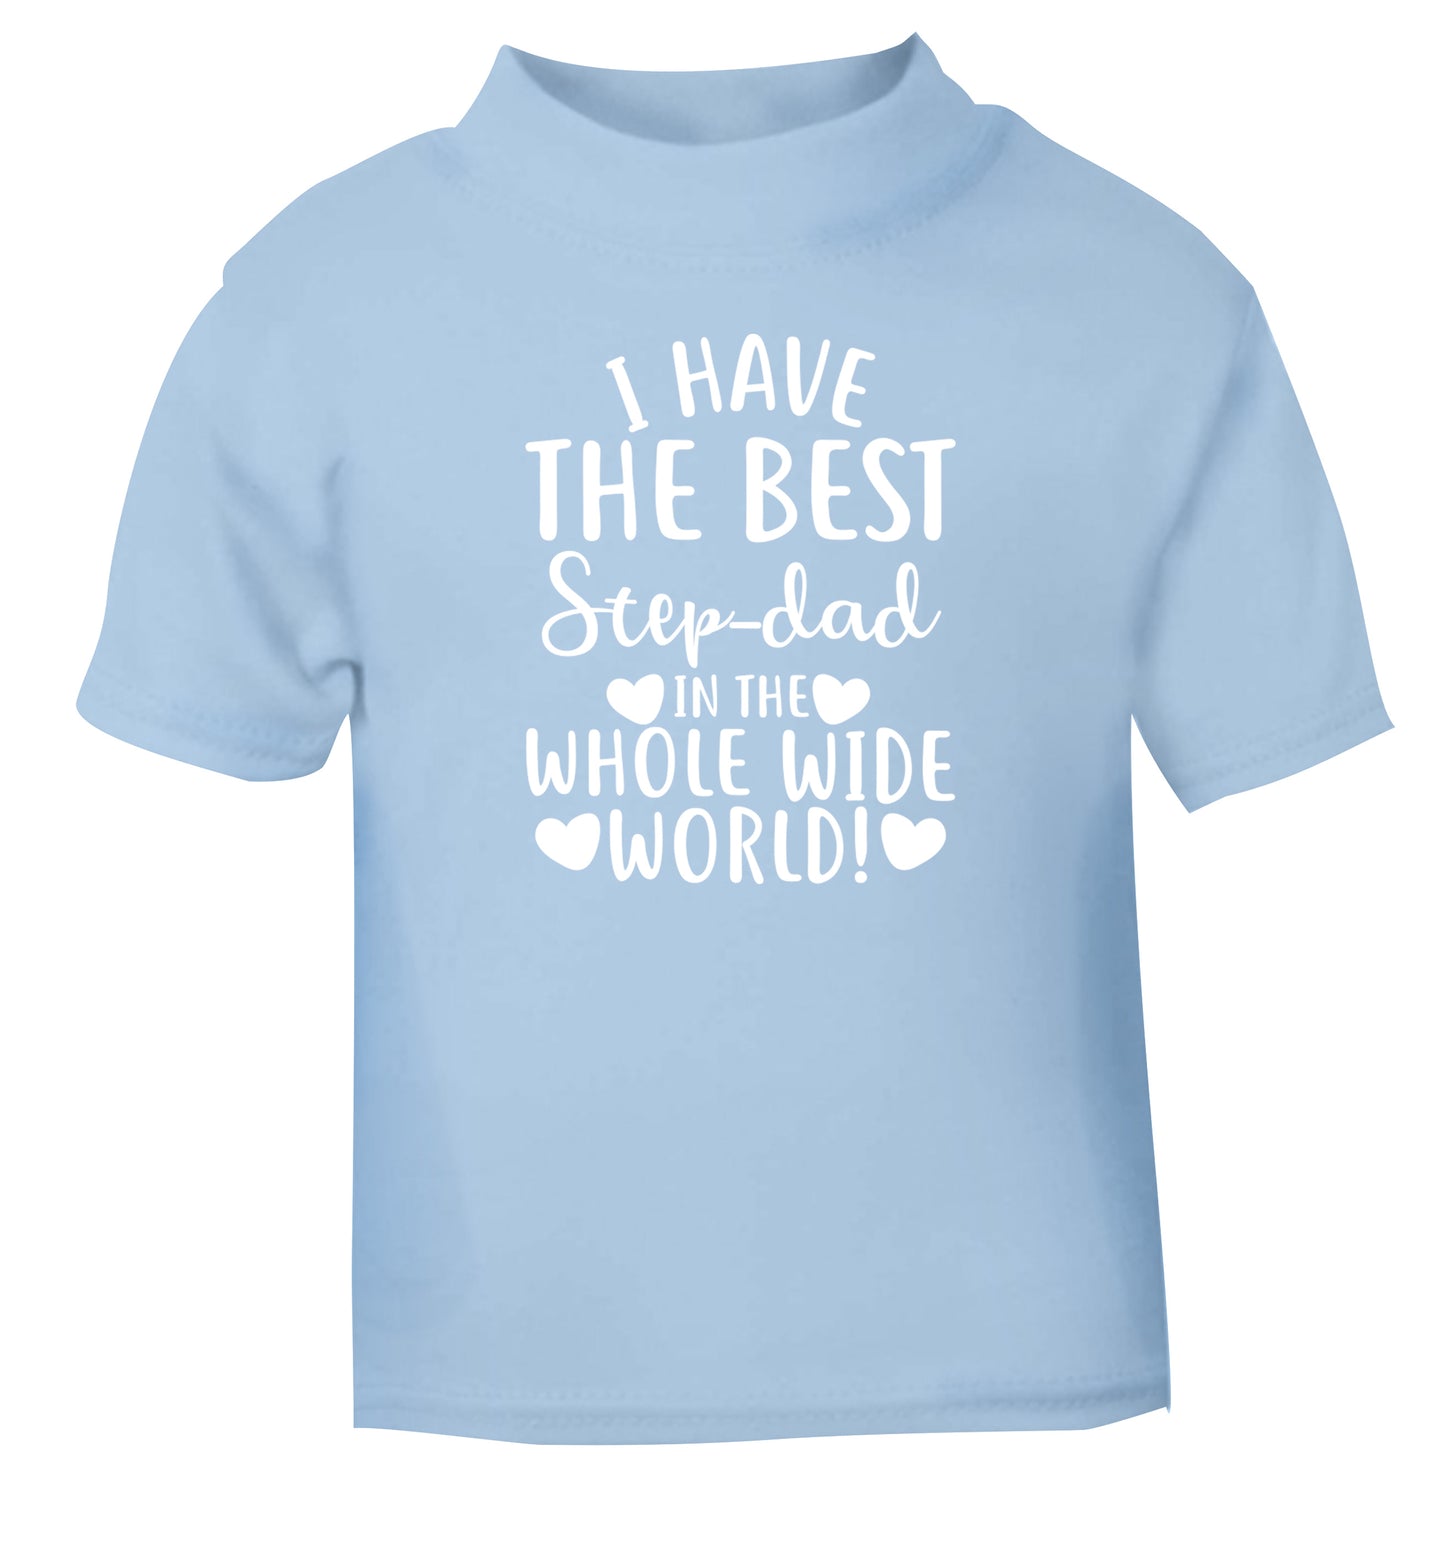 I have the best step-dad in the whole wide world! light blue Baby Toddler Tshirt 2 Years